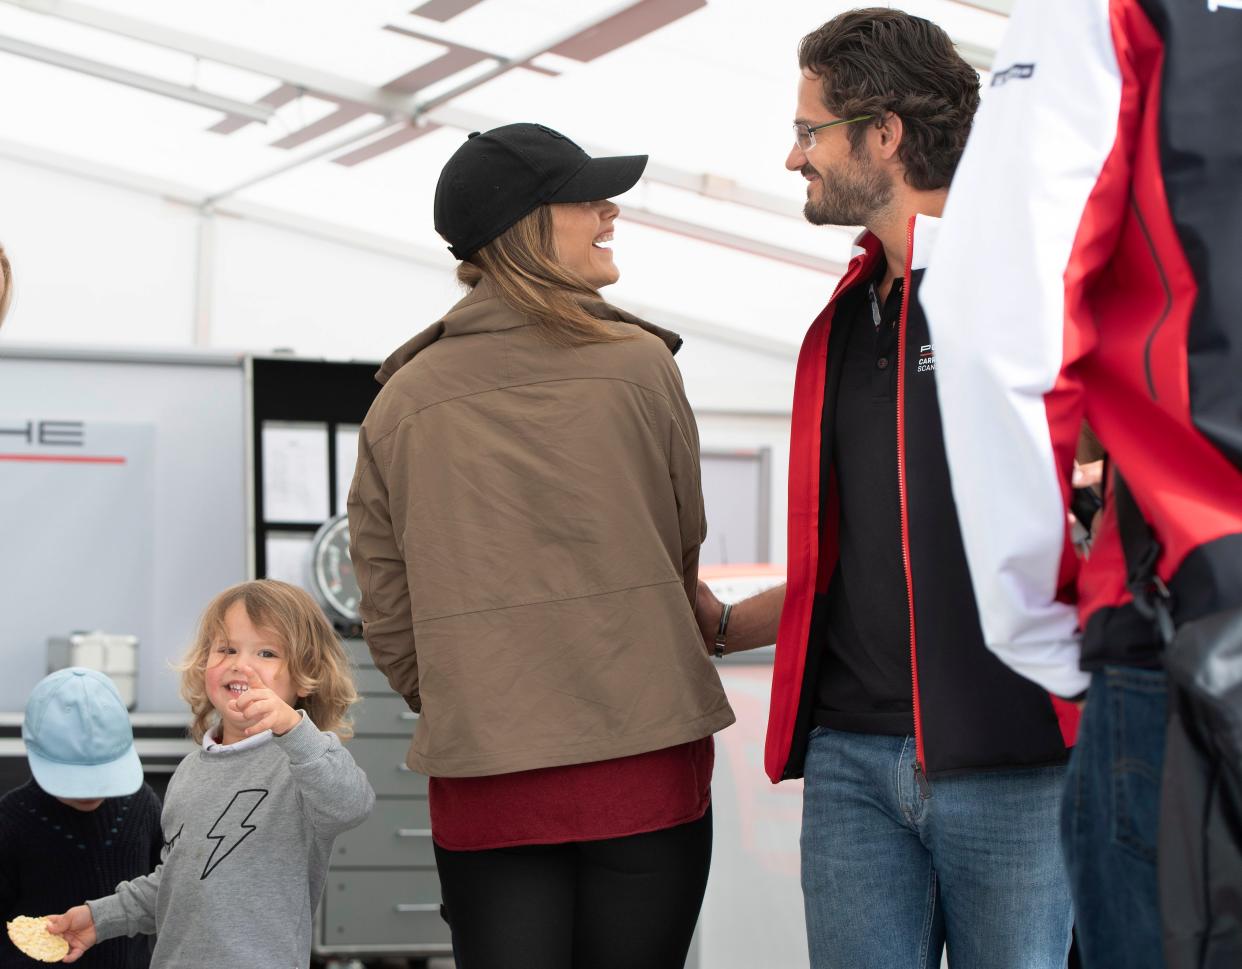 Princess Sofia (C) and Prince Carl Philip of Sweden (R) with their sons Prince Alexander (2-L) and Prince Gabriel (L) join a visit to the Gellerasen Motor stadium in Karlskoga, Sweden, in 2019 (EPA)